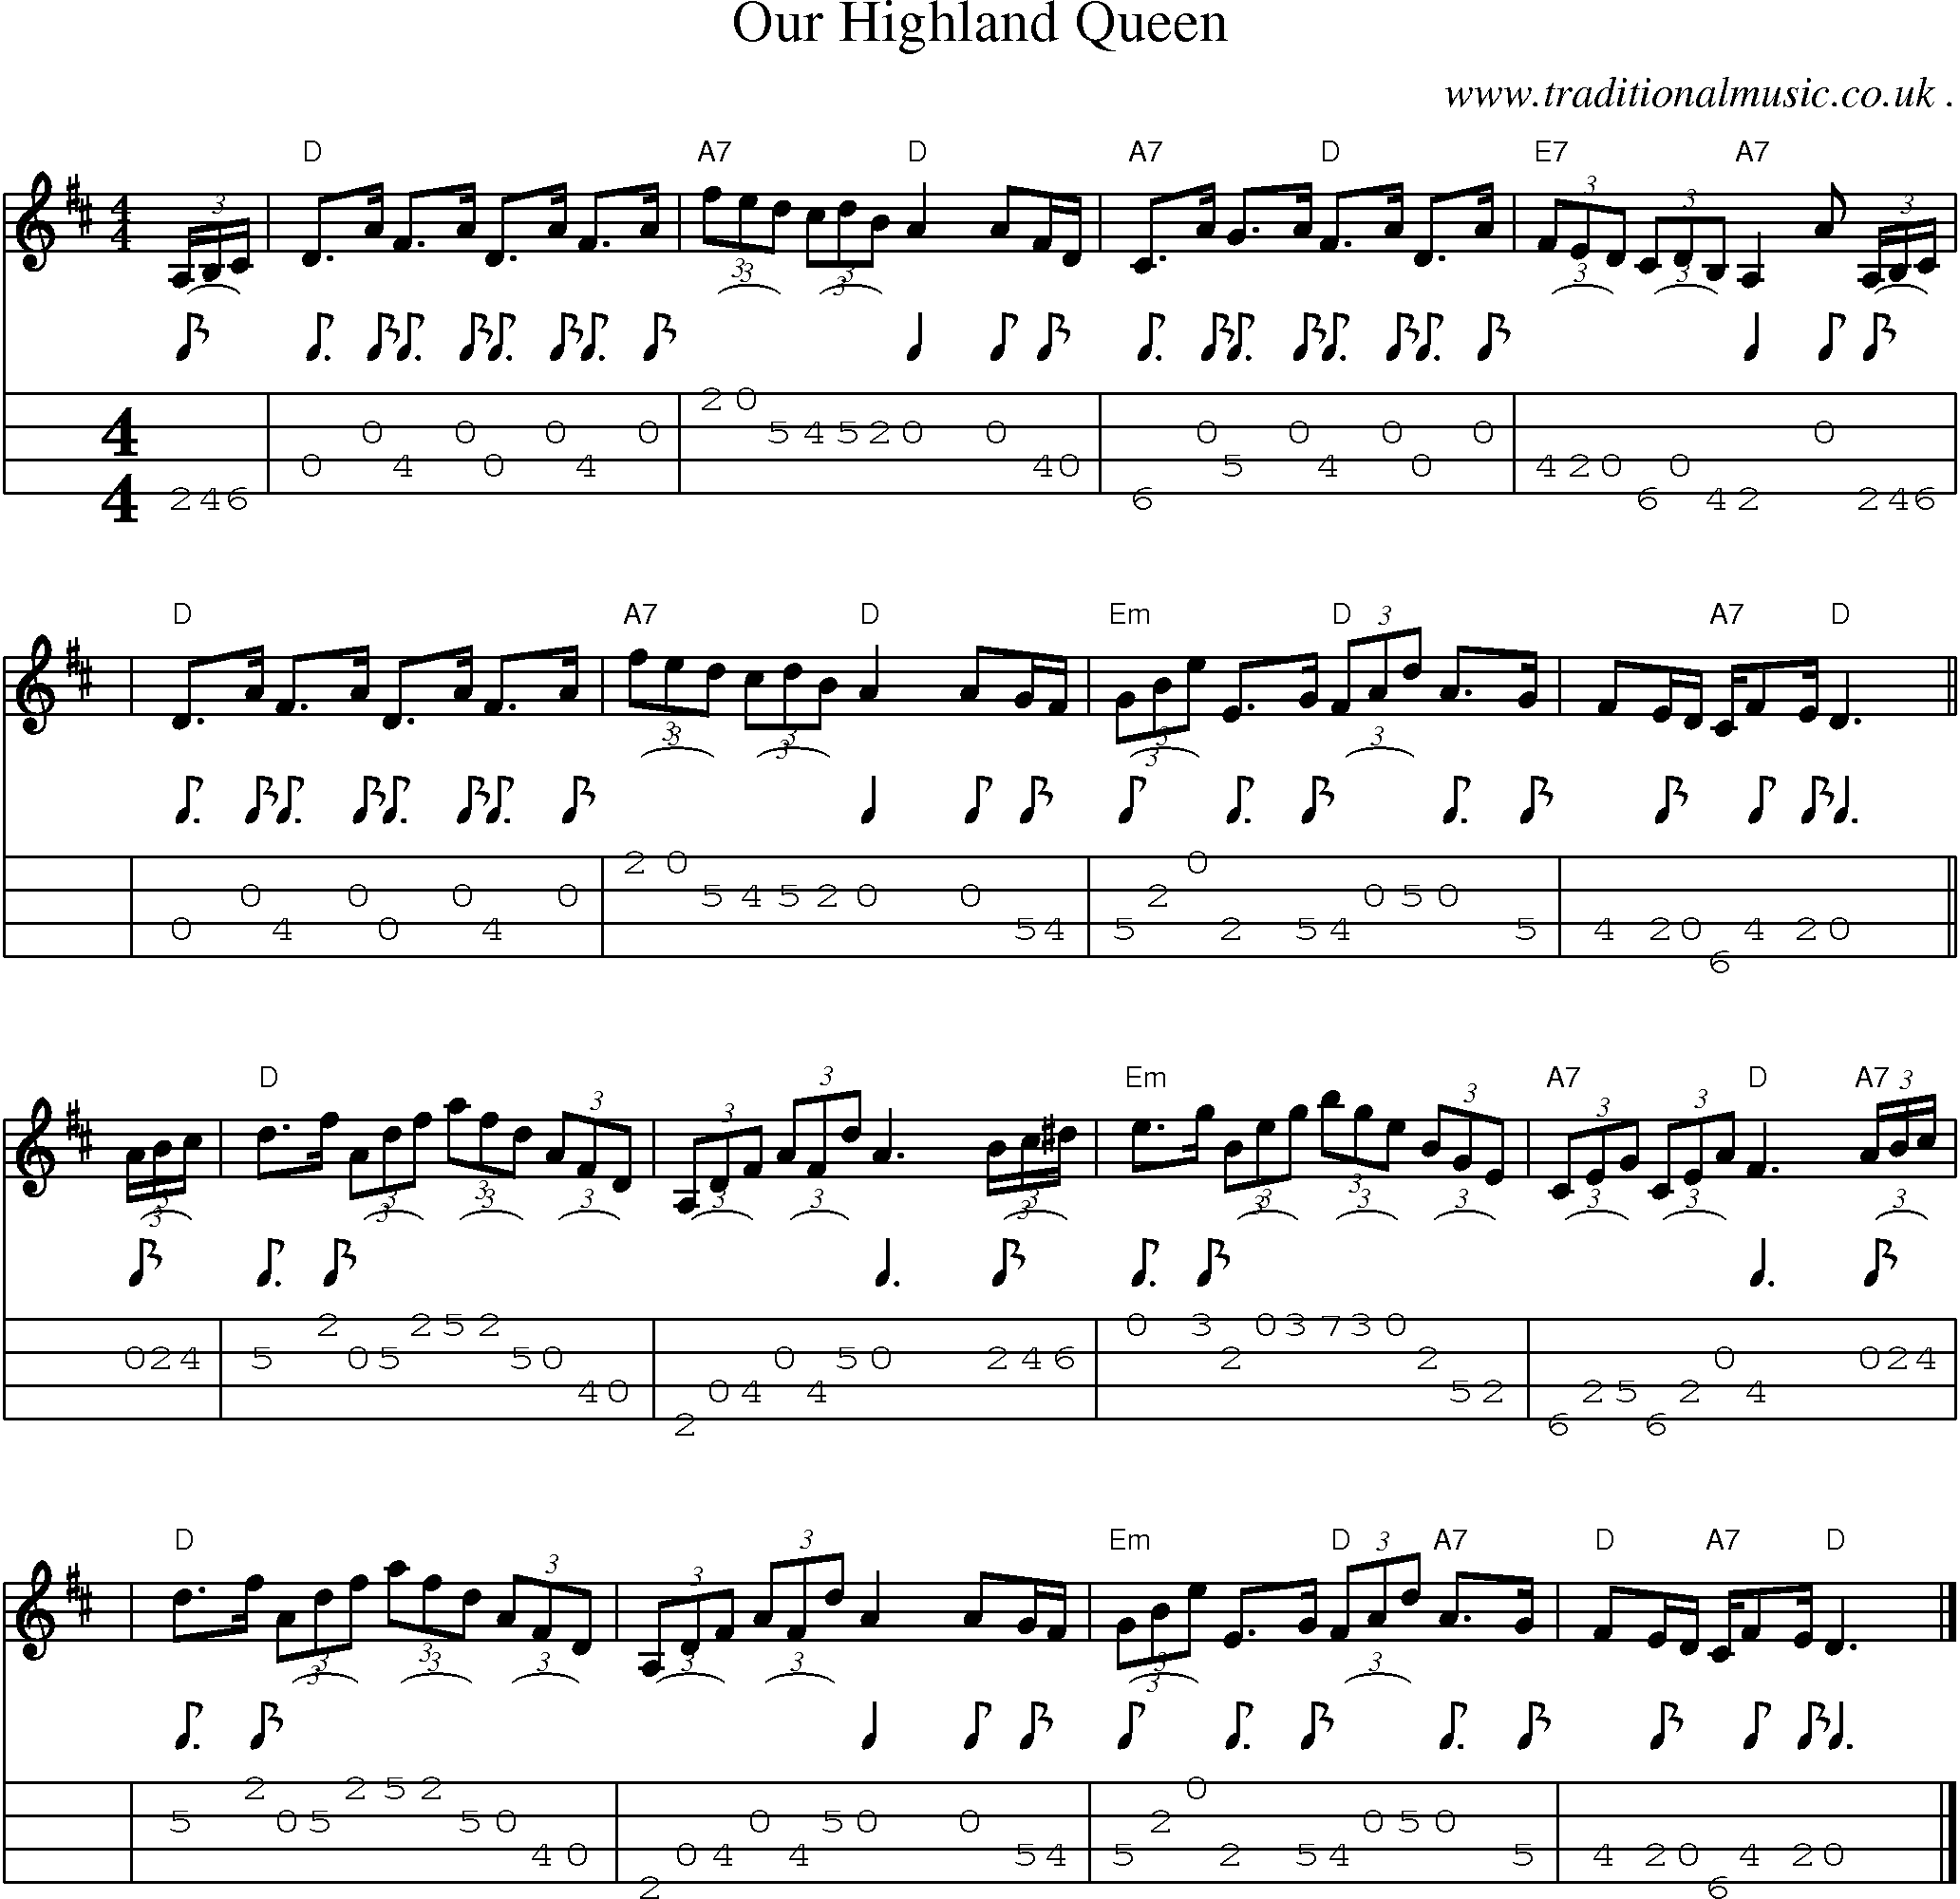 Sheet-music  score, Chords and Mandolin Tabs for Our Highland Queen